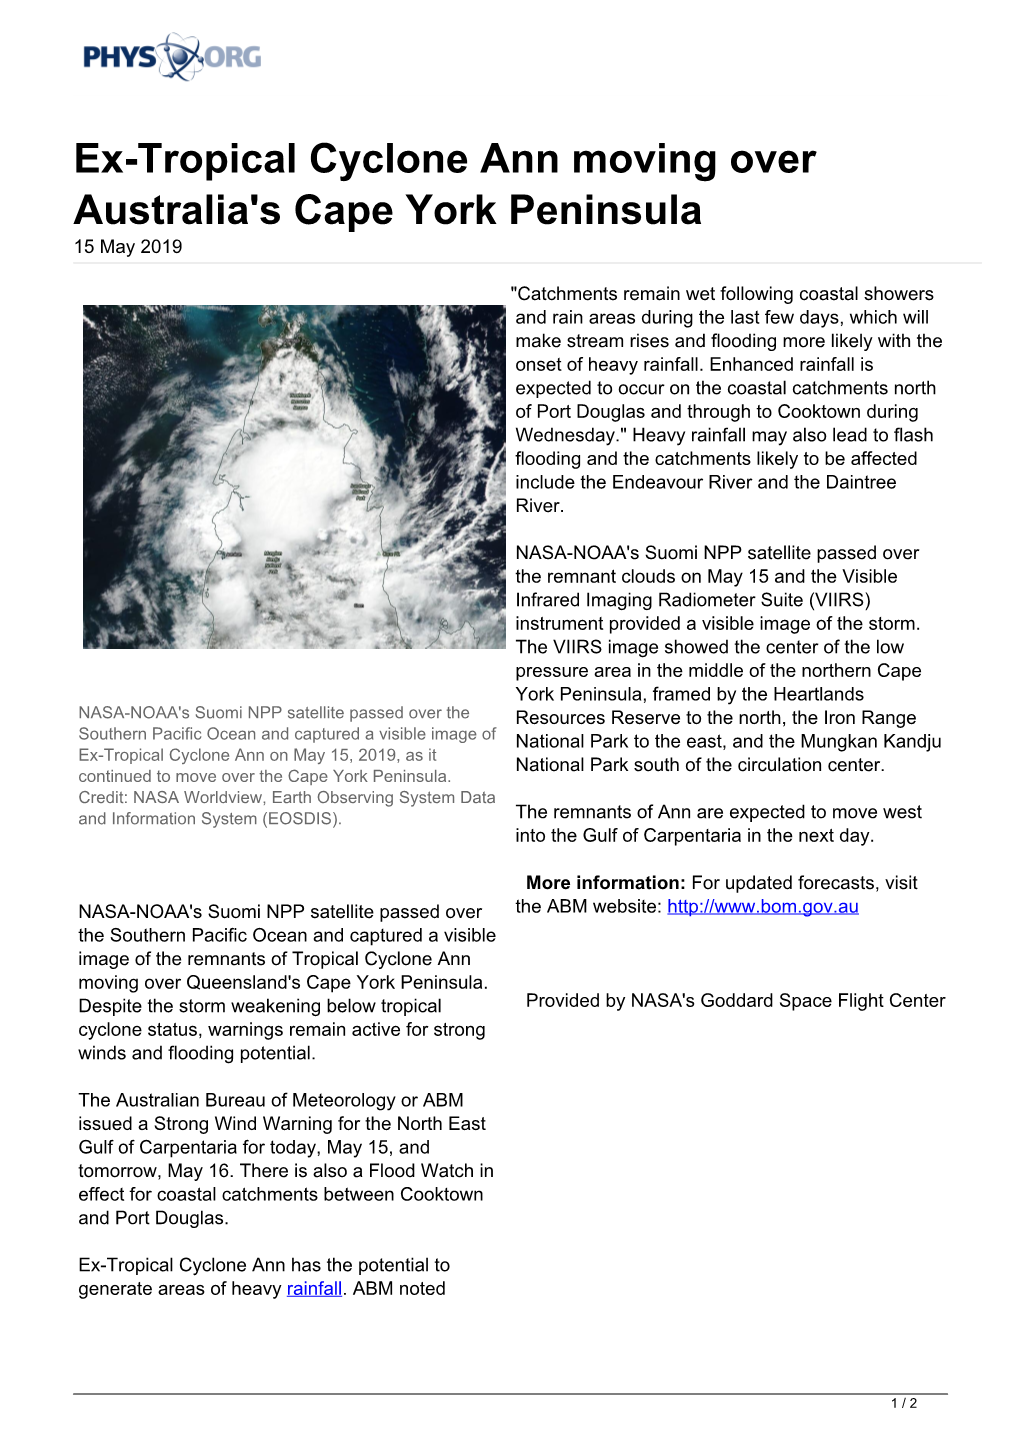 Ex-Tropical Cyclone Ann Moving Over Australia's Cape York Peninsula 15 May 2019